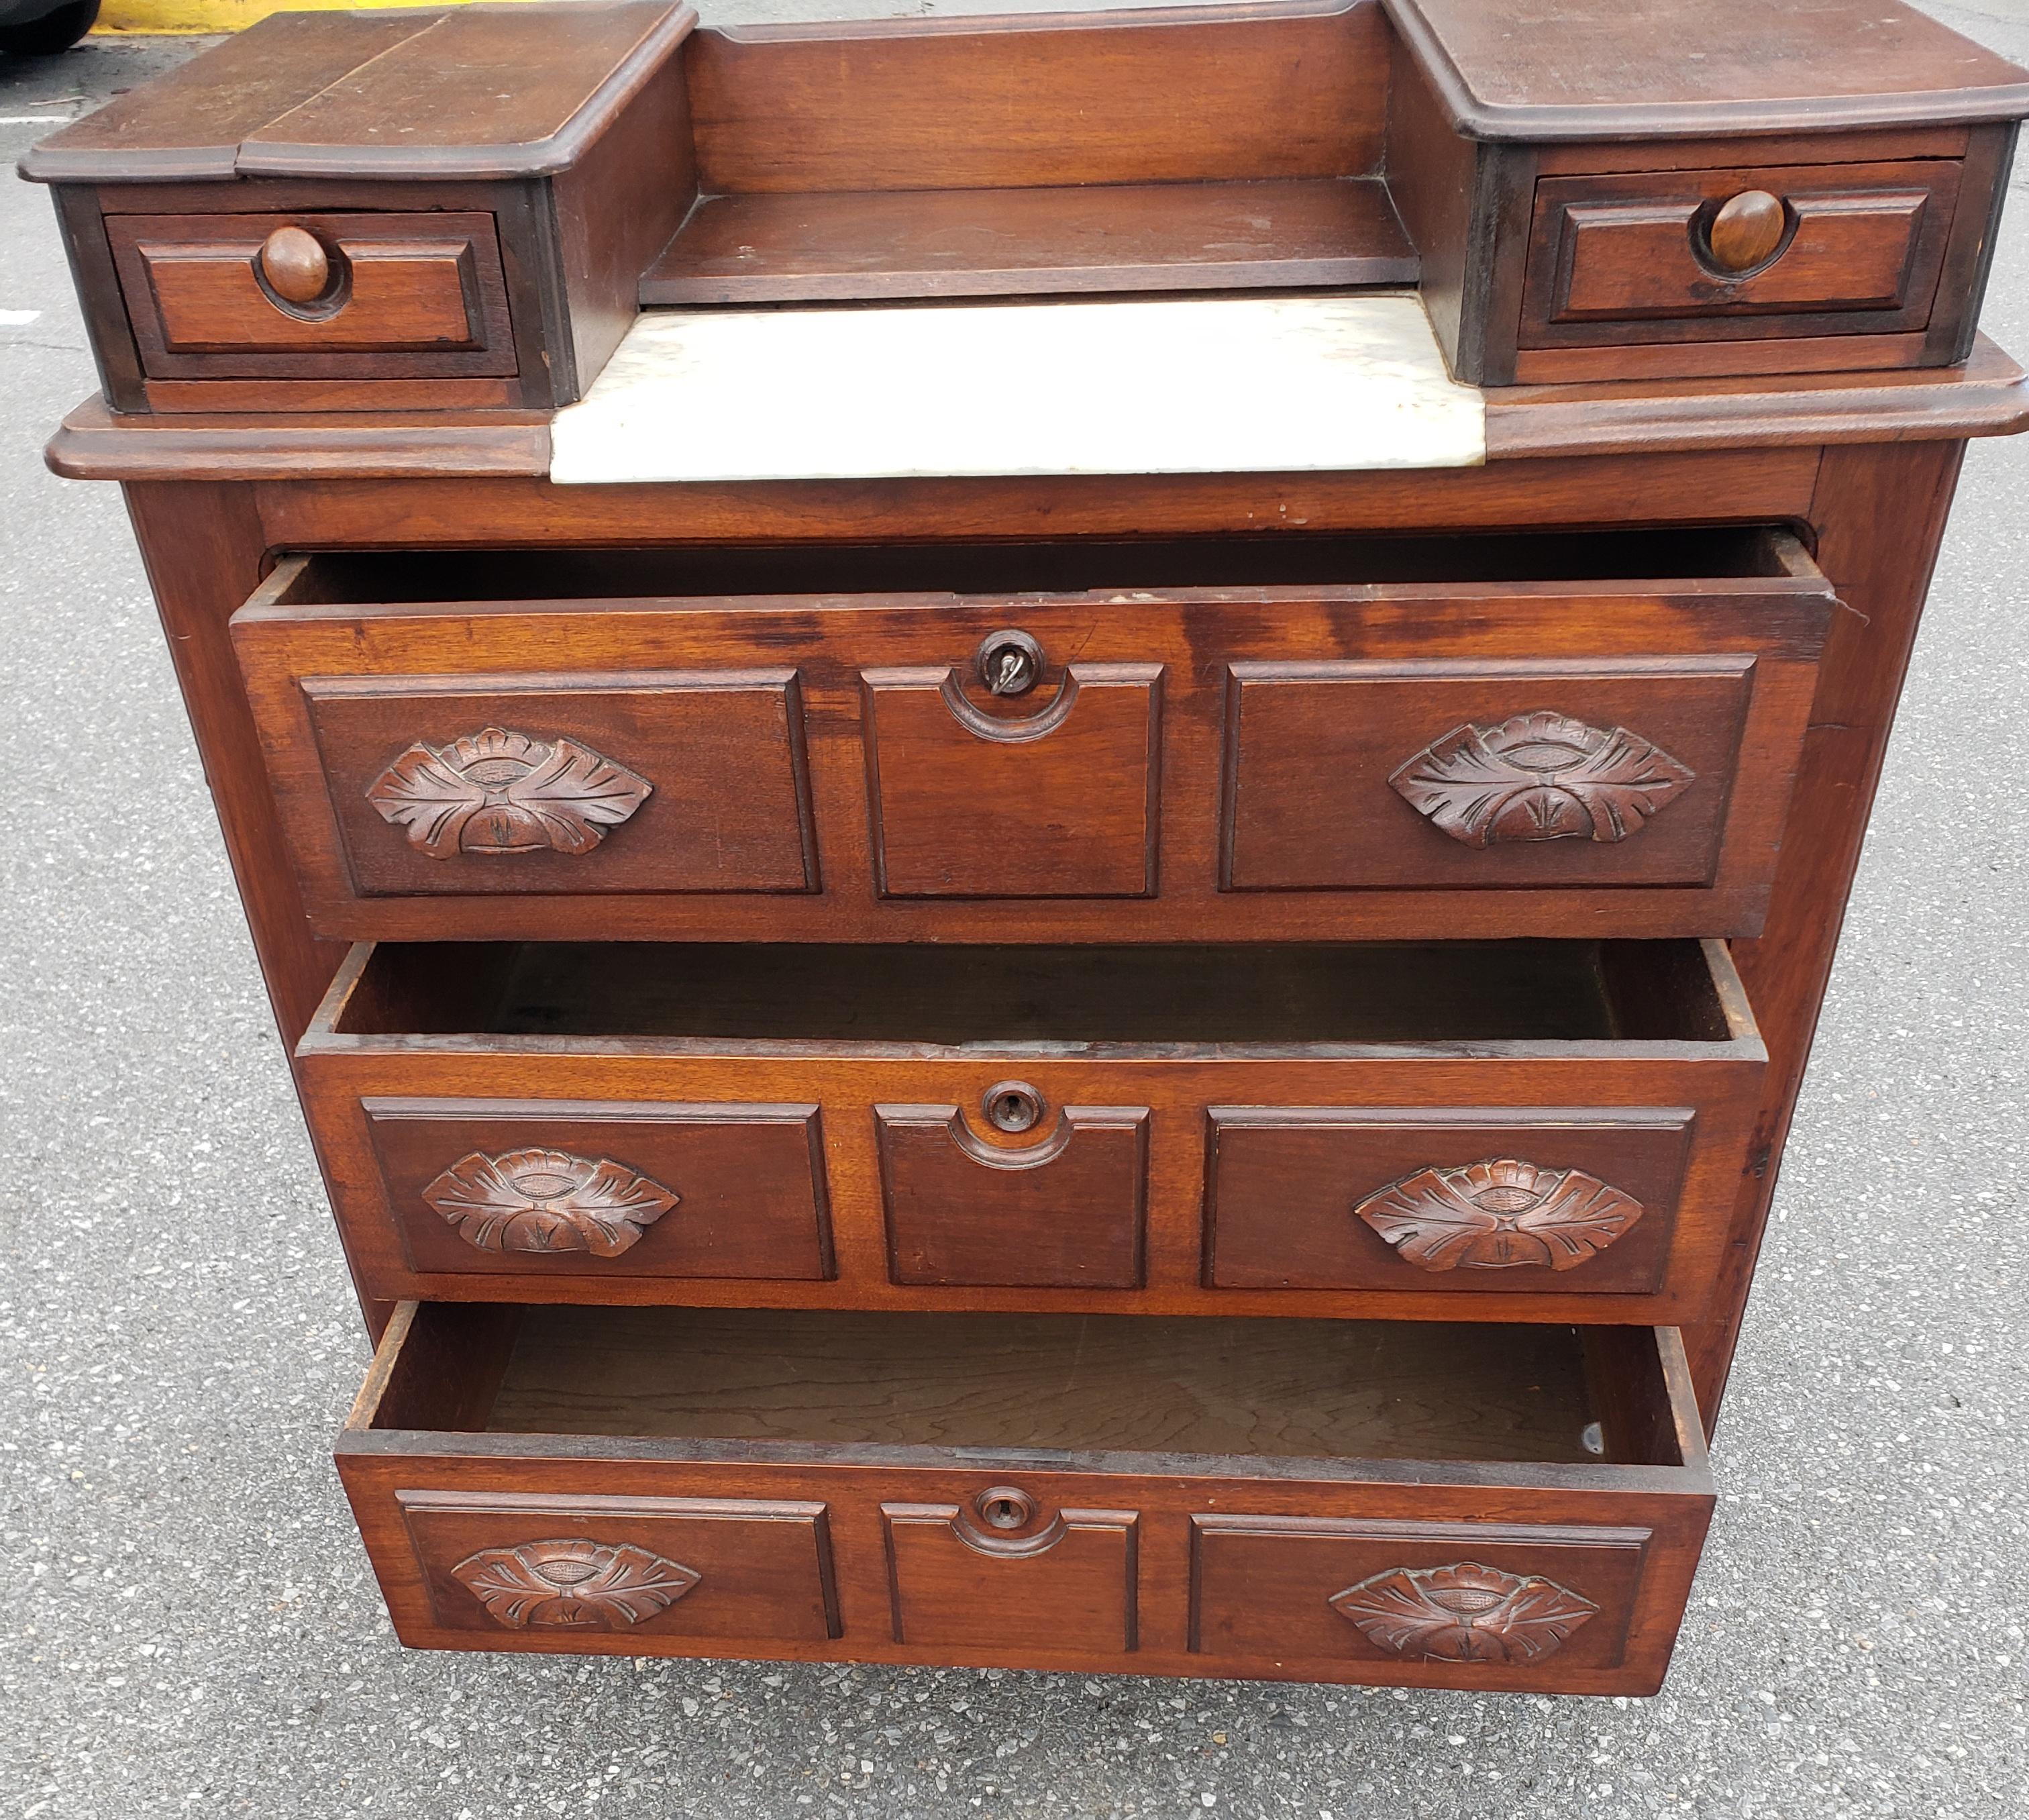 19th C. American Empire Eastlake Mahogany Dresser w/ Marble Top Inset and Mirror In Good Condition For Sale In Germantown, MD